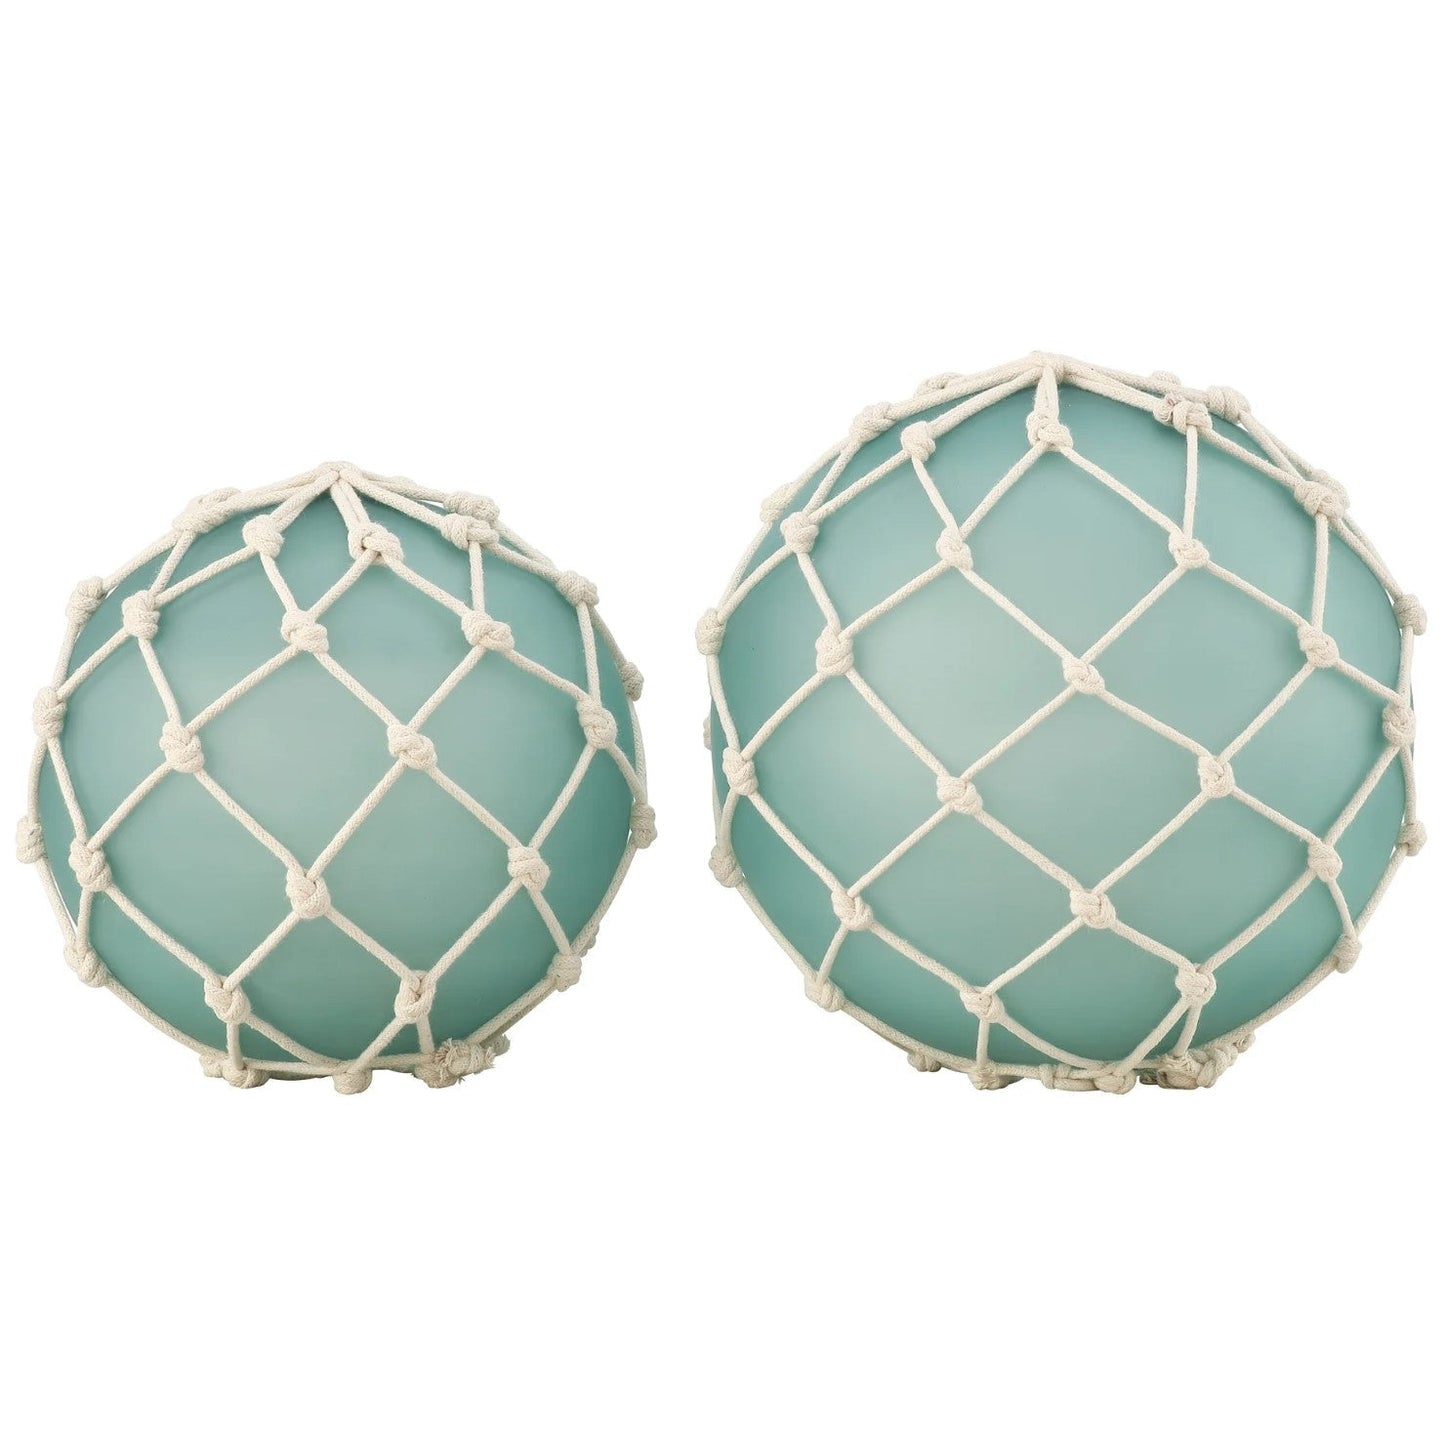 Crestview Collection 10" & 8" Coastal Glass Fisher Buoys Decoration Wrapped With Bleached Rope In Aqua Glass Finish